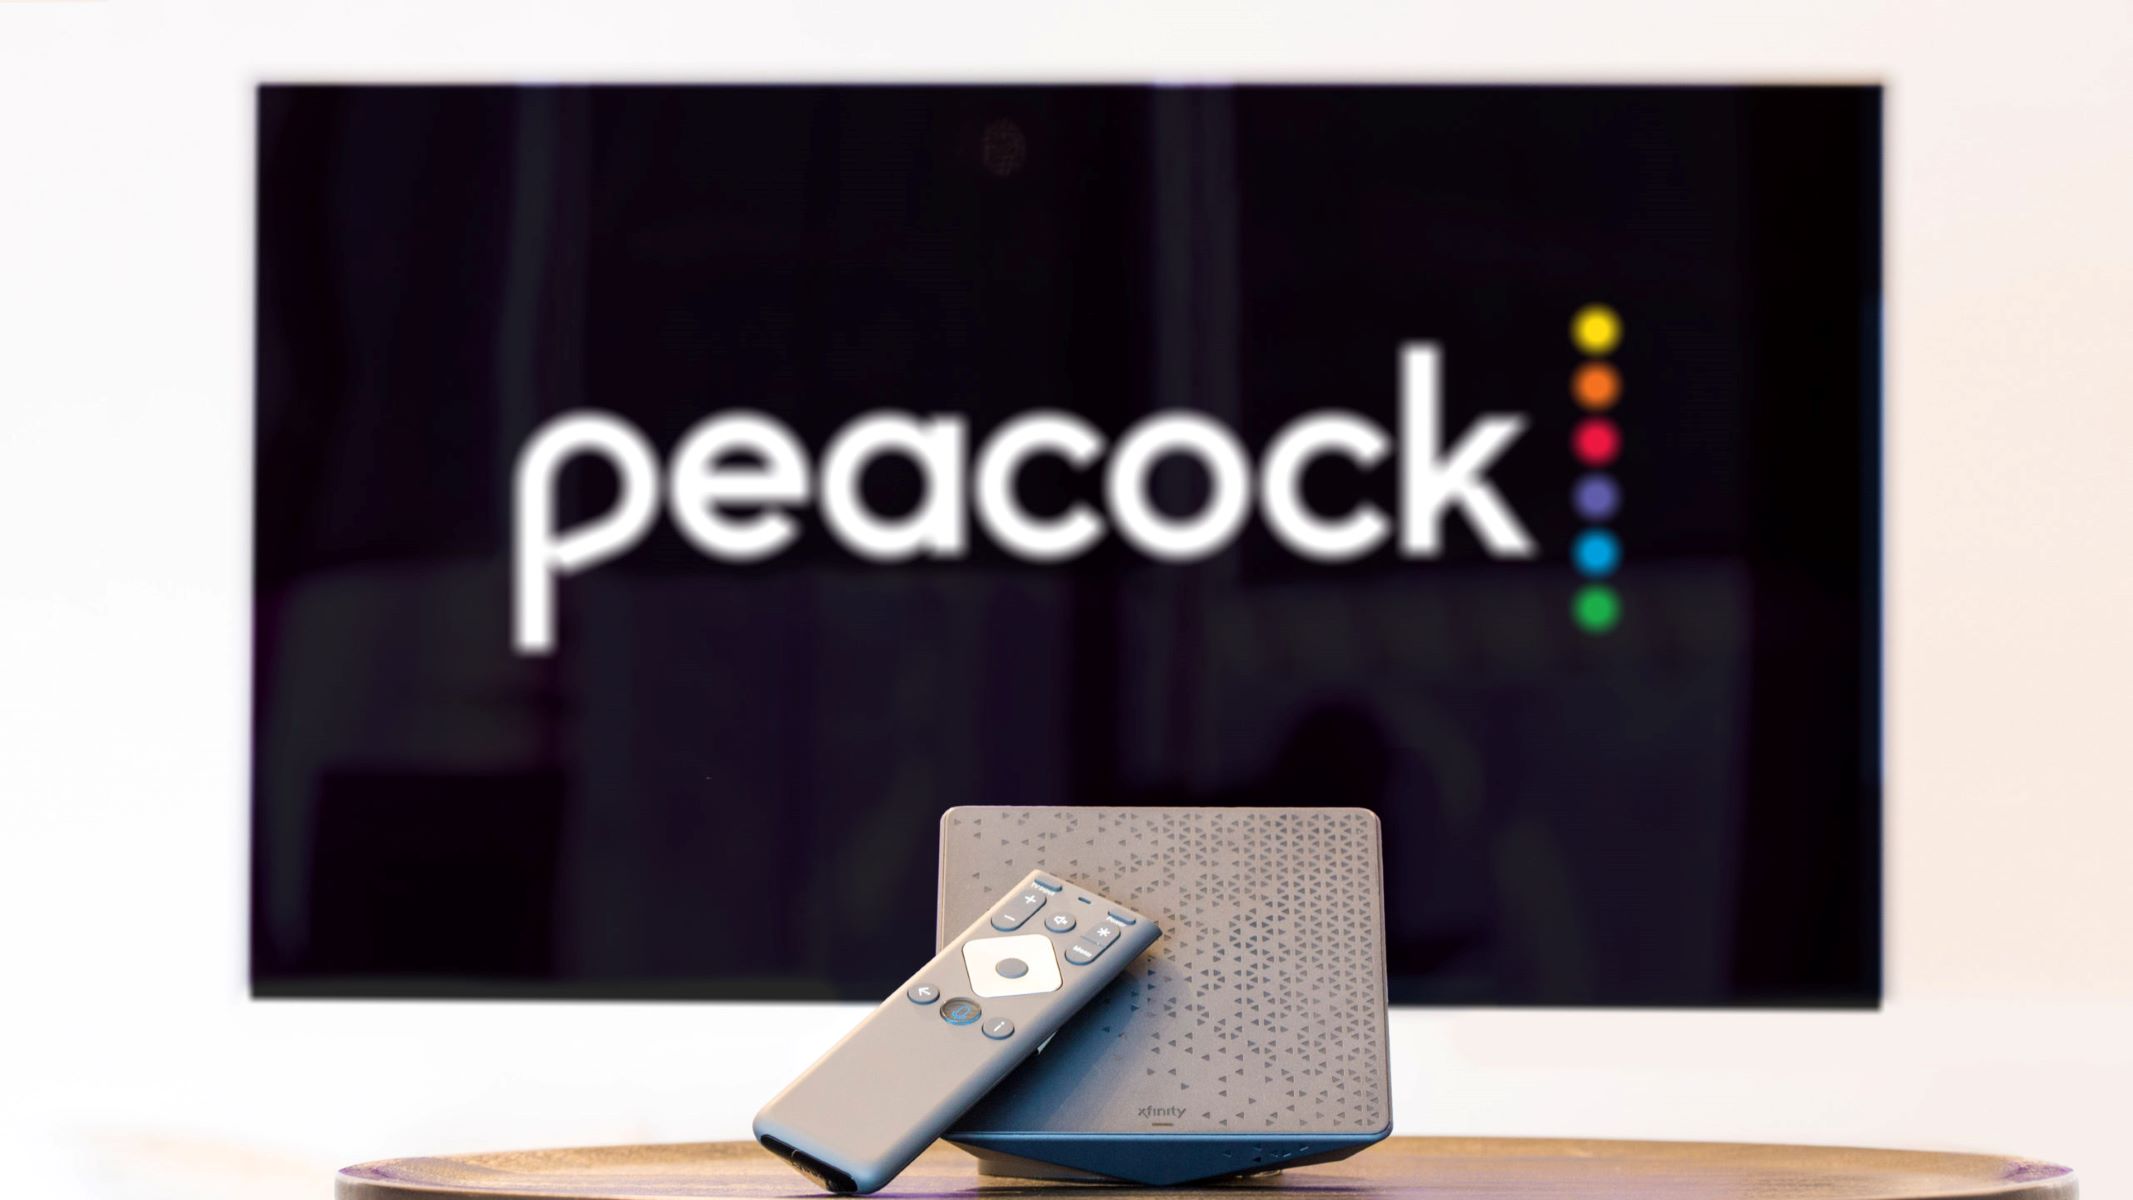 How To Watch Peacock TV With Xfinity